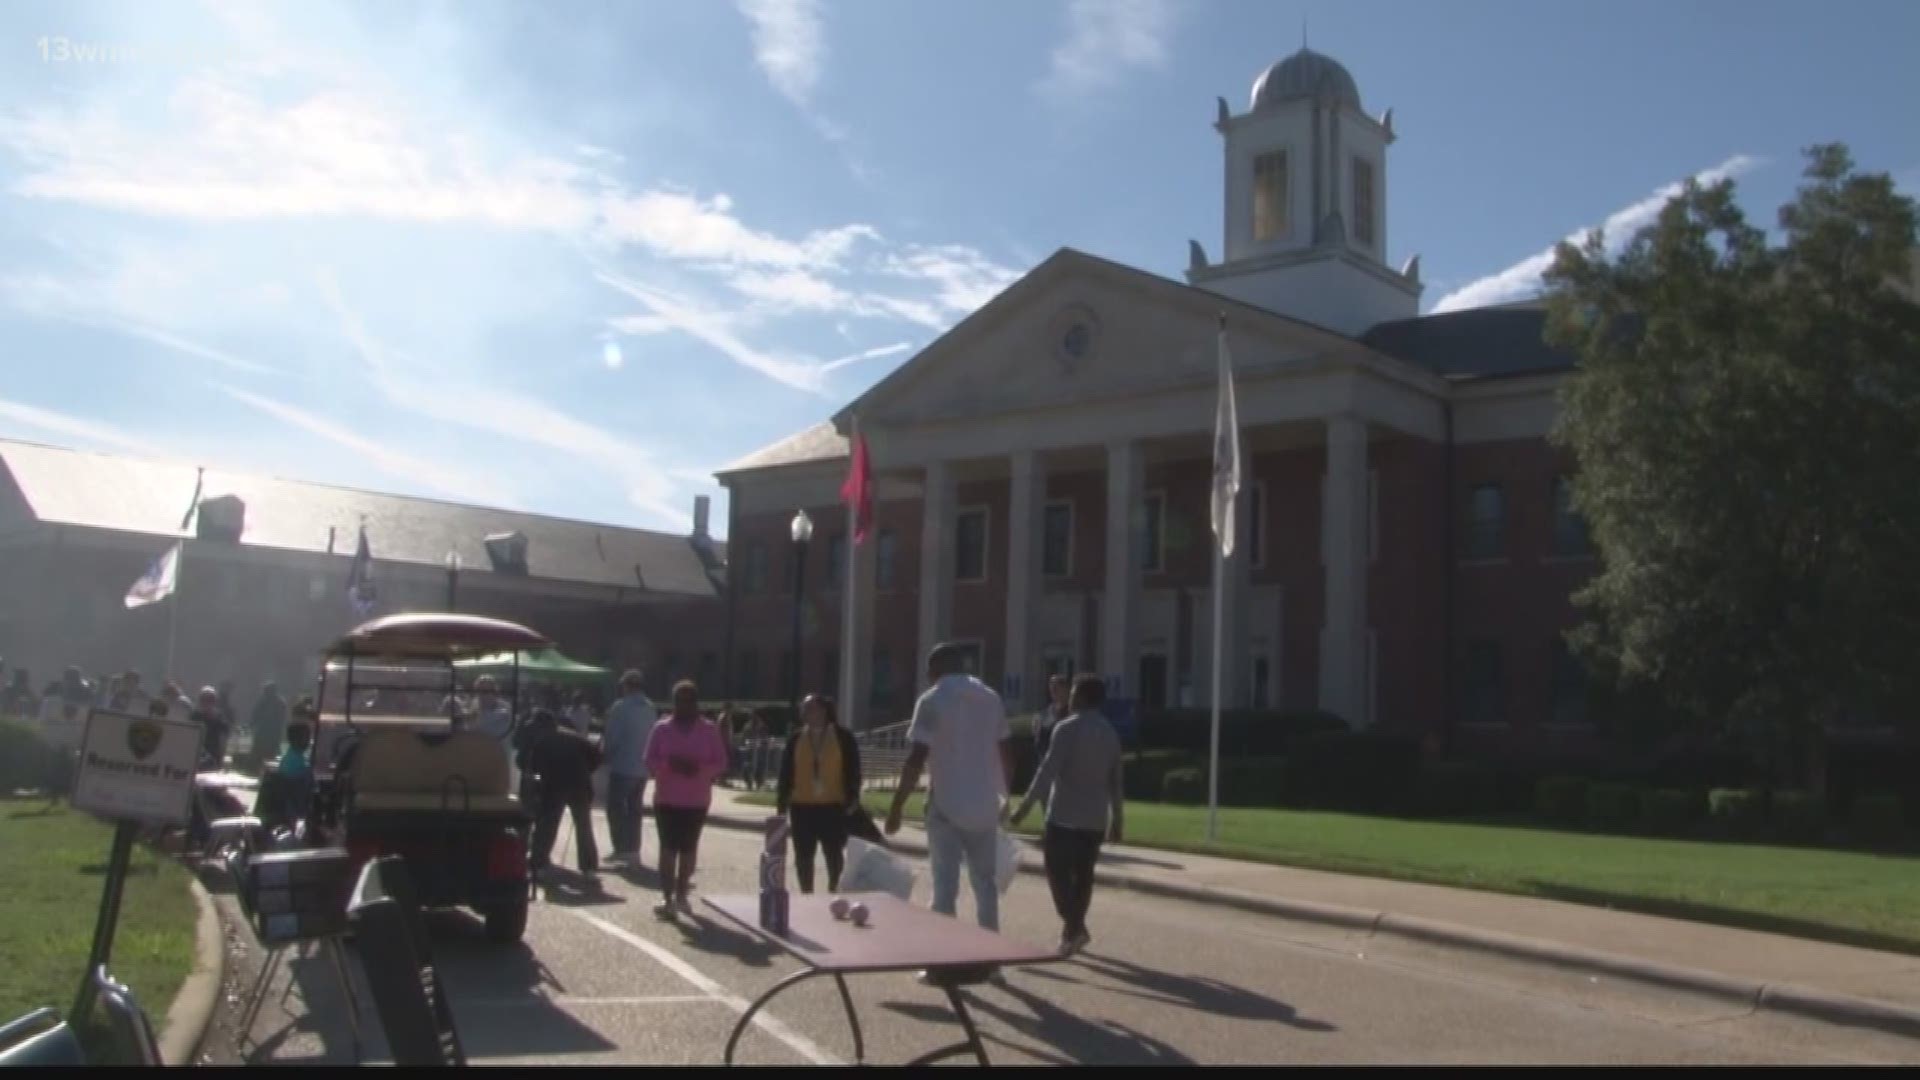 The Dublin VA held their fall festival Saturday after it got rained out a few weeks ago. People showed up to grab snacks, play games, and get information on the VA.